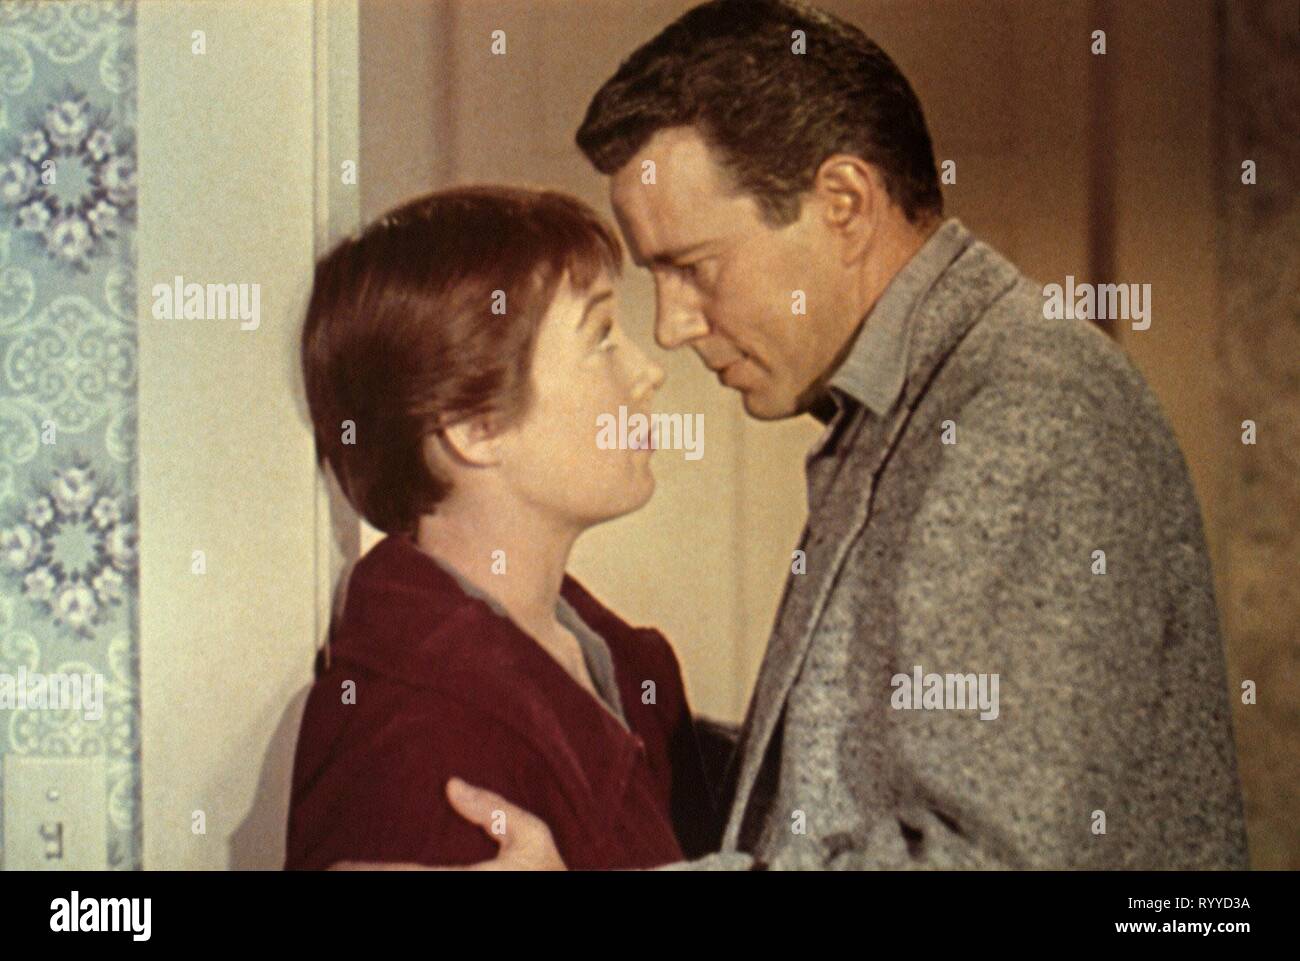 MACLAINE,FORSYTHE, THE TROUBLE WITH HARRY, 1955 Stock Photo